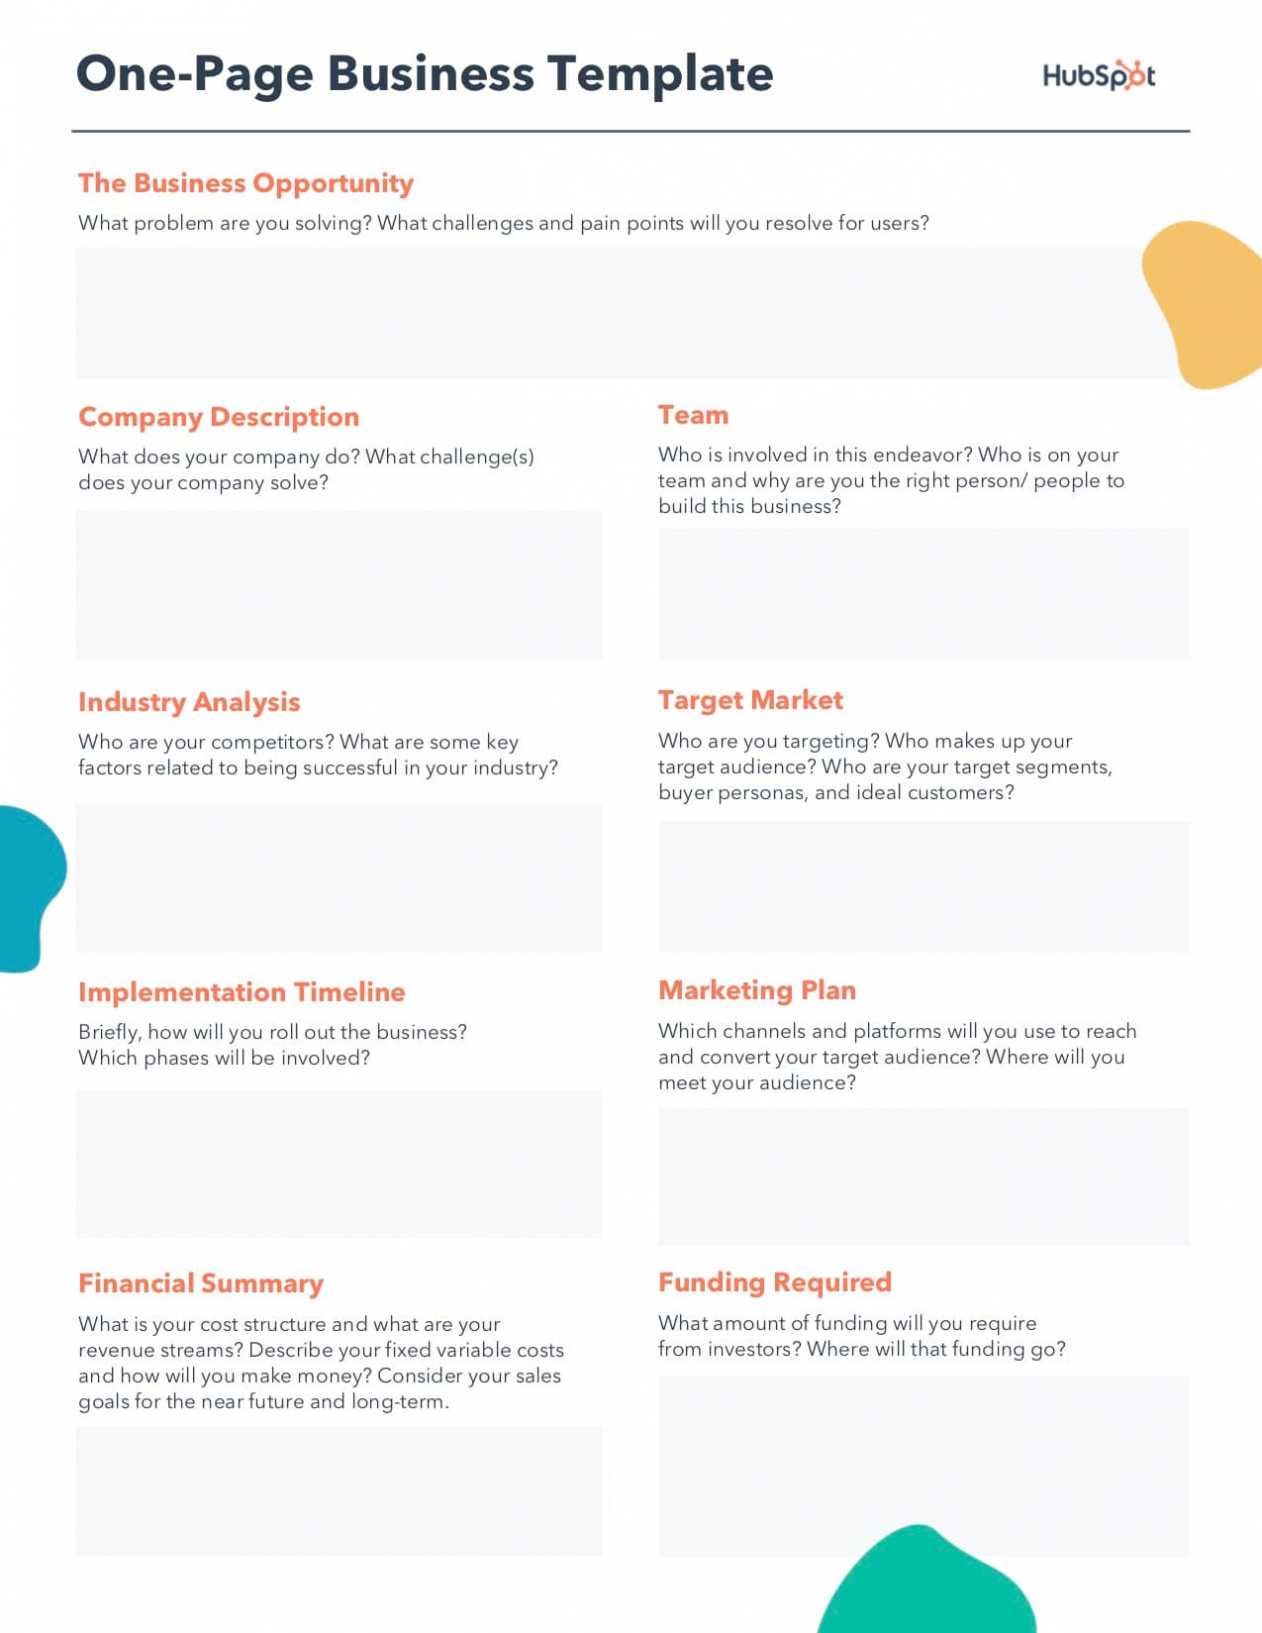 Free Business Plan Template [Updated For 2020] | Download Now intended for How To Put Together A Business Plan Template